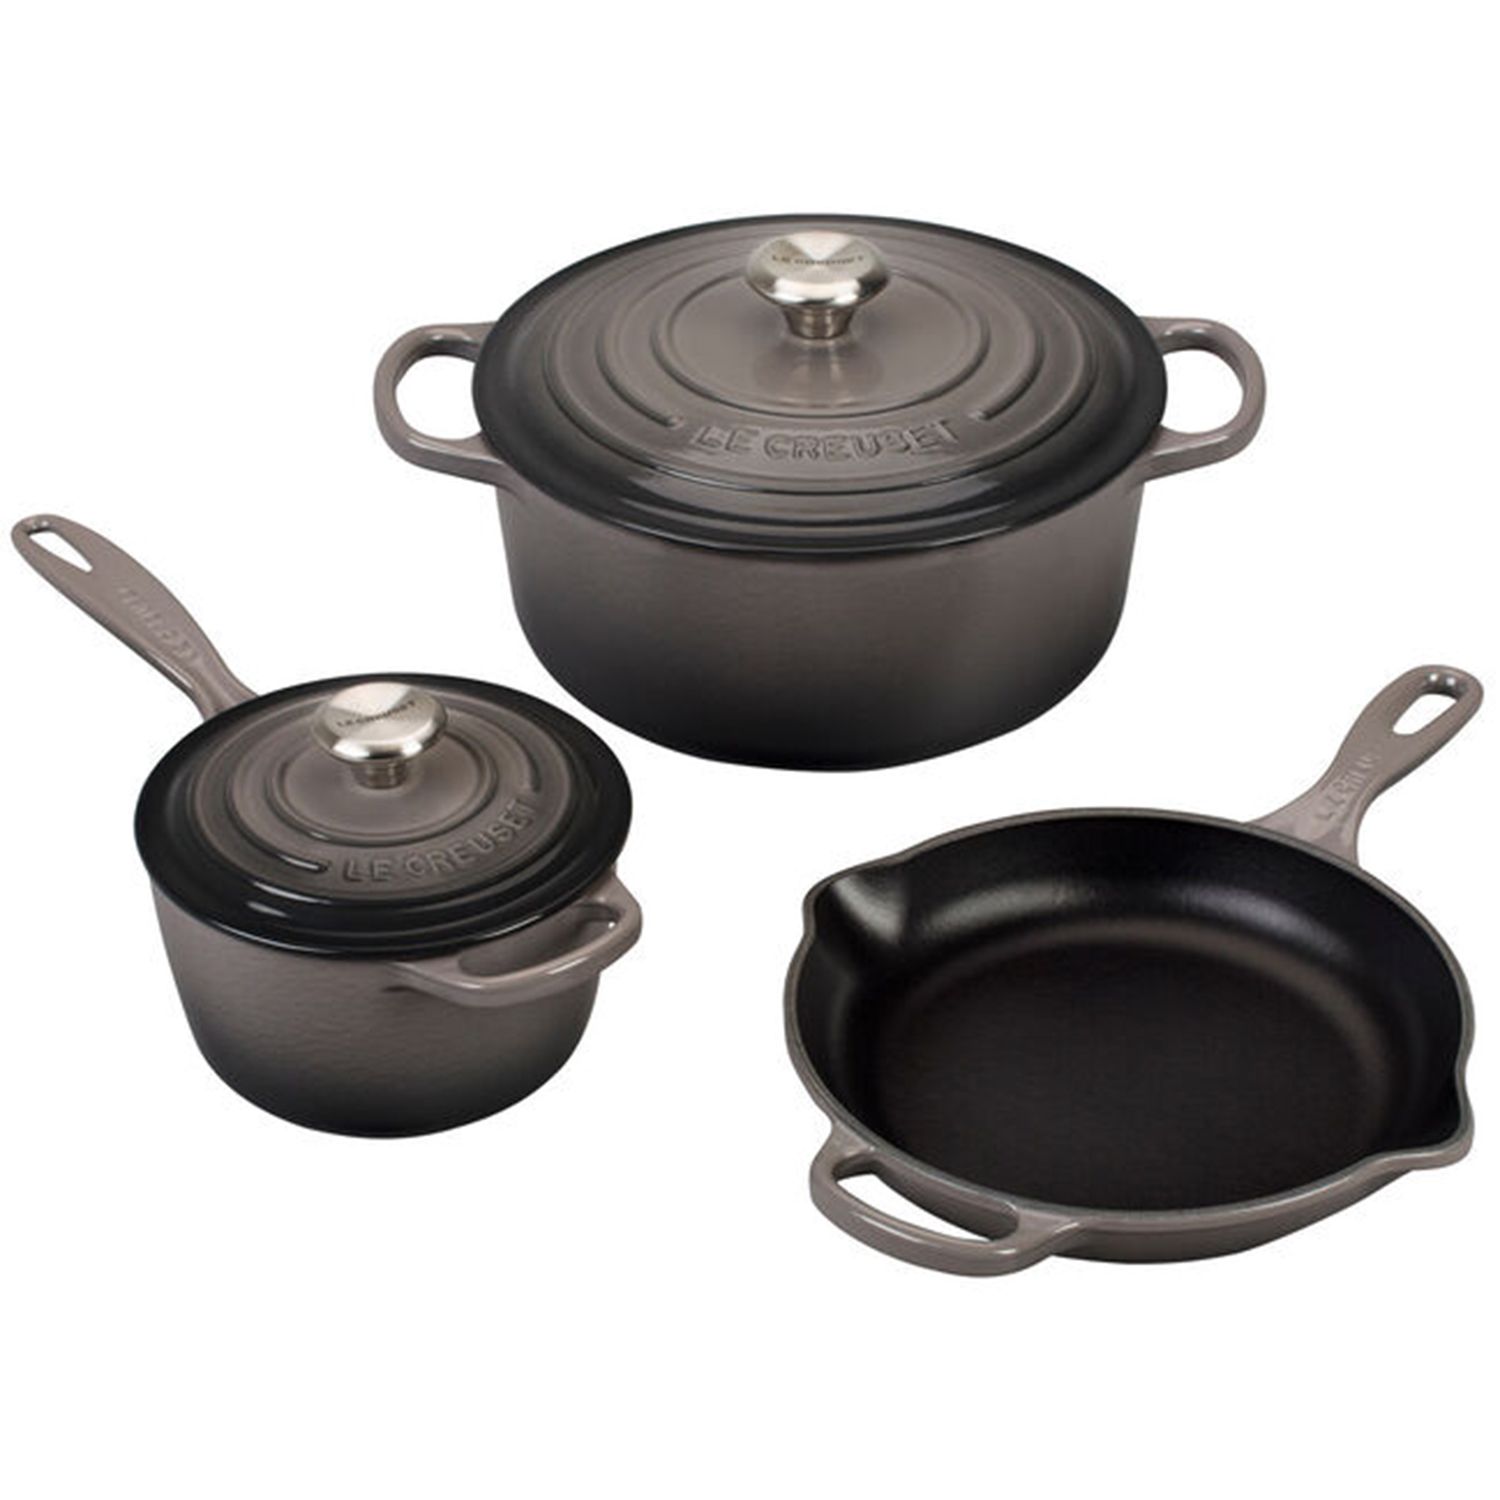 Le creuset presidents day sale